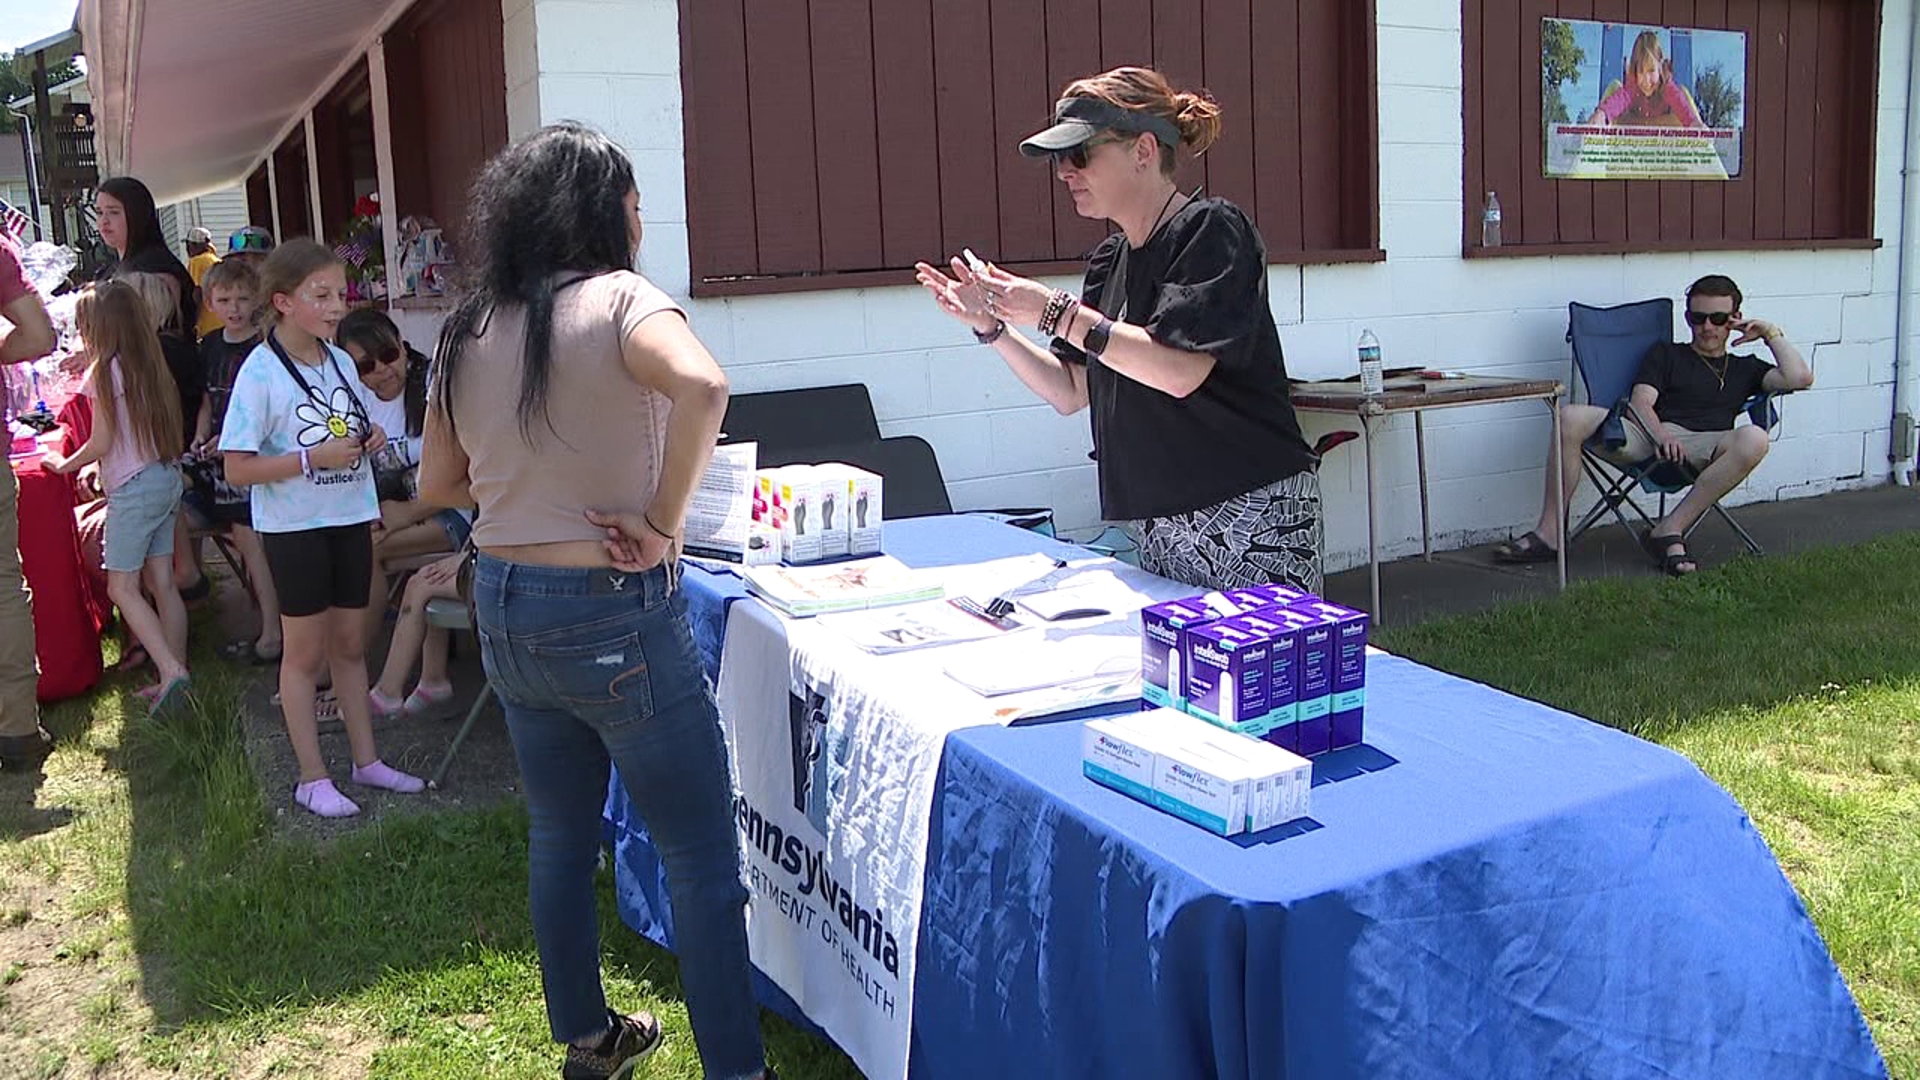 One group in Luzerne County is spreading awareness for substance abuse disorders.